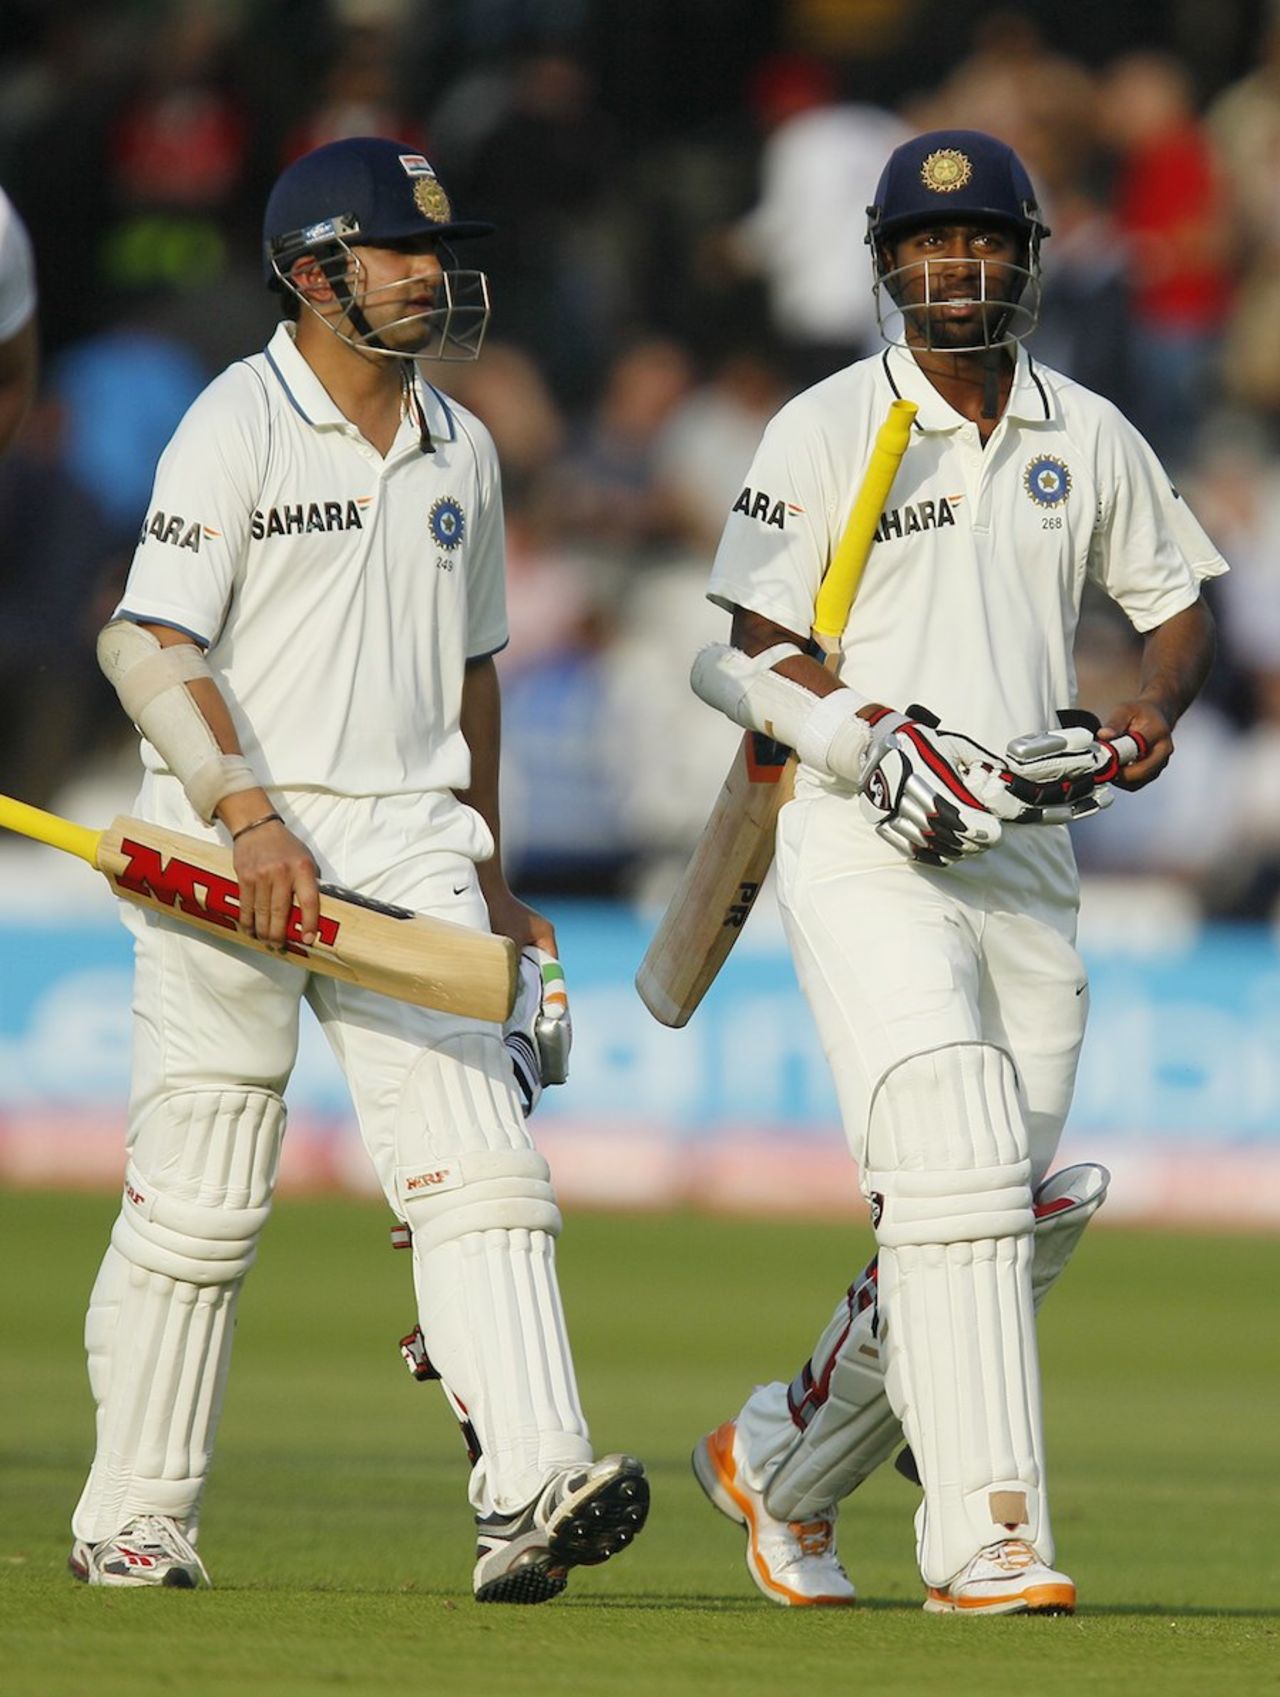 Gautam Gambhir and Abhinav Mukund survived a testing period, England v India, 1st Test, Lord's, 2nd day, July 22, 2011